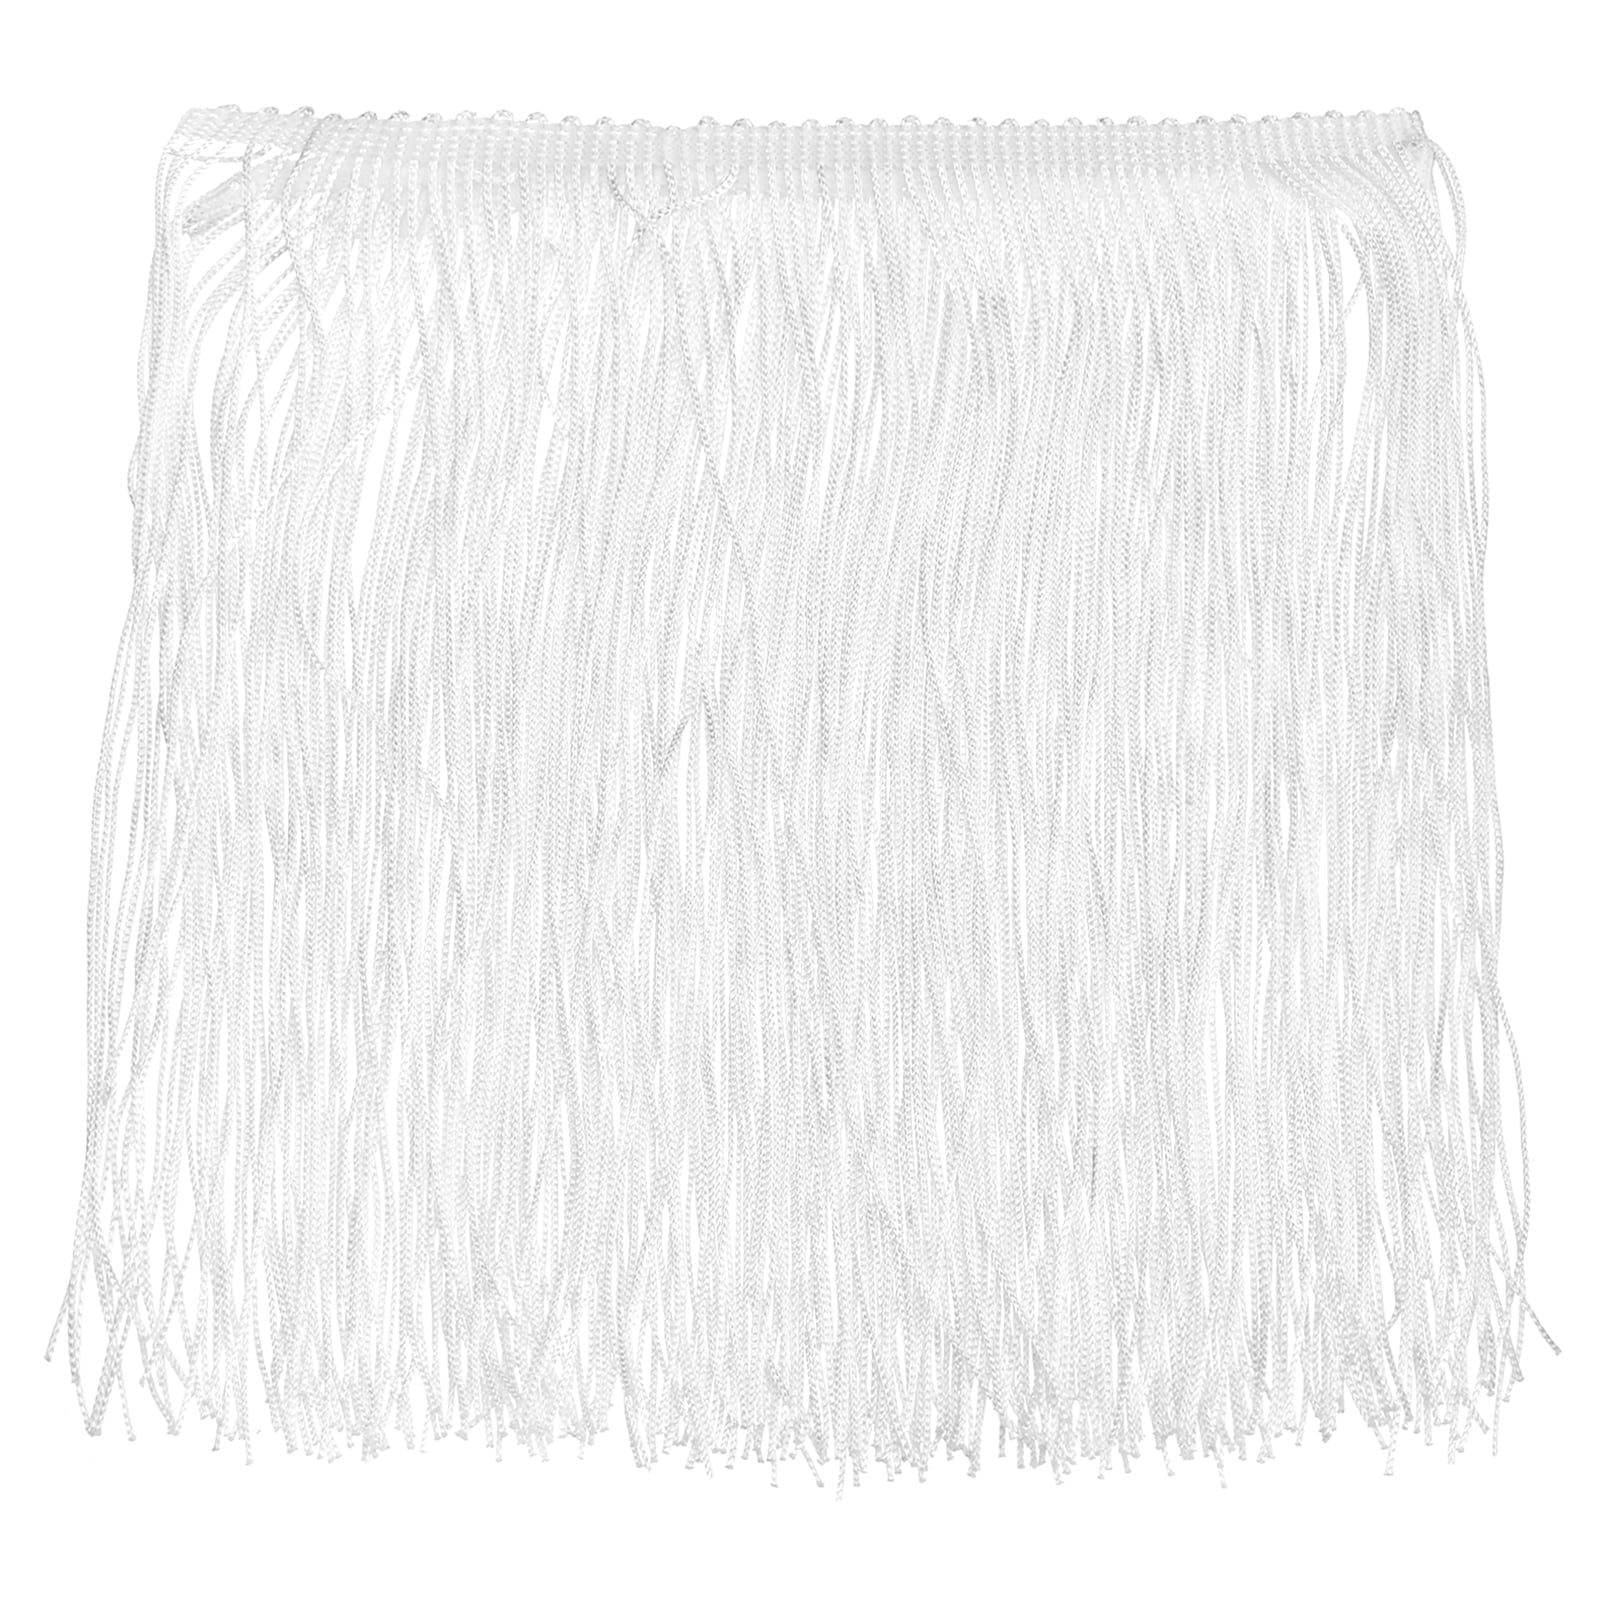 6 Glitter Chainette Fringe Trim (Sold by the Yard) - Trims By The Yard